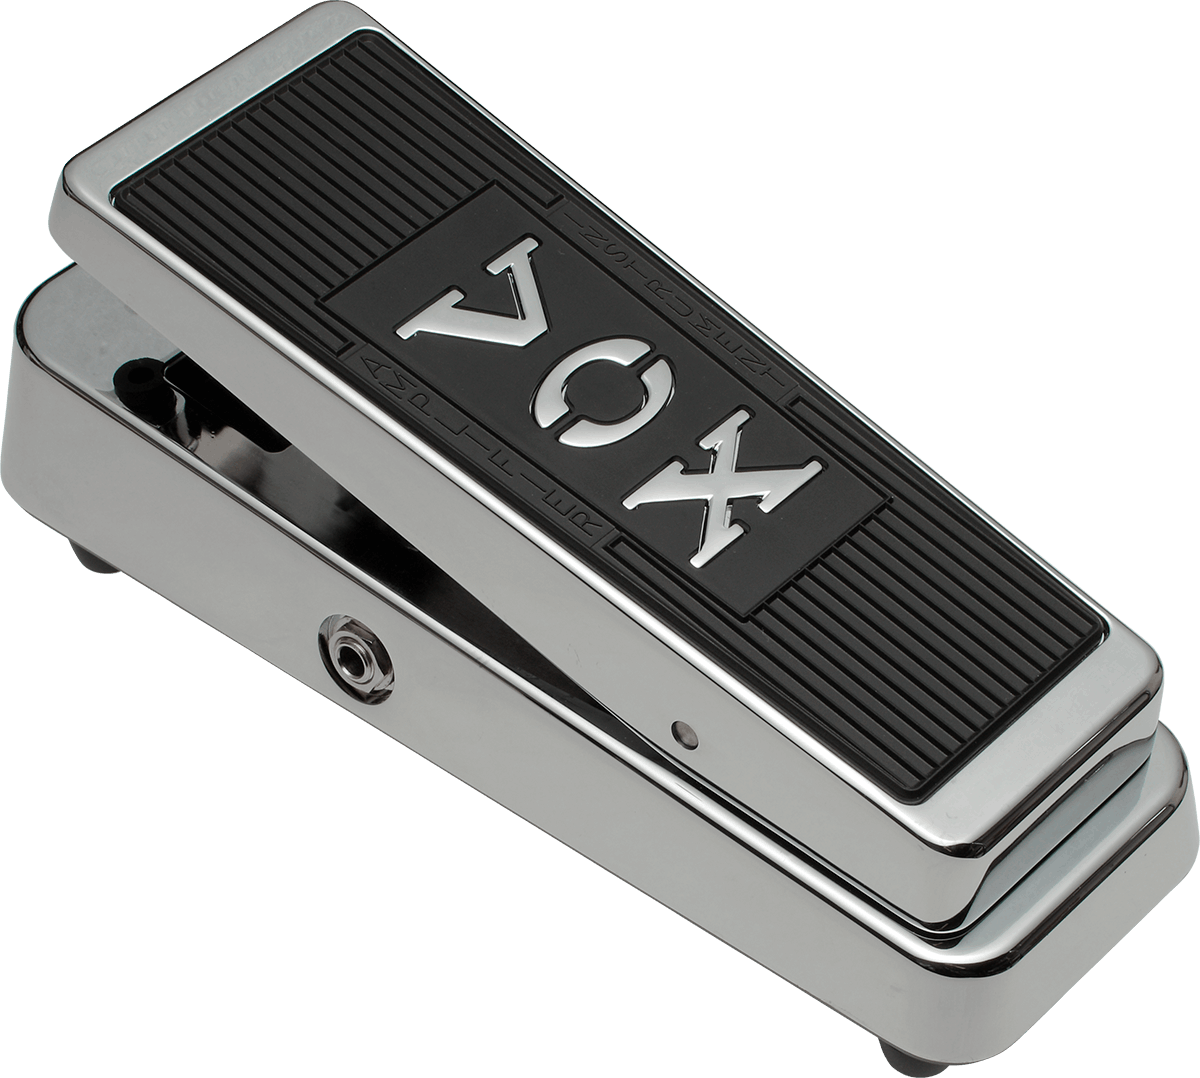 Vox Vrm-1-ltd Real Mccoy Chrome Edition Wah - Wah & filter effect pedal - Main picture